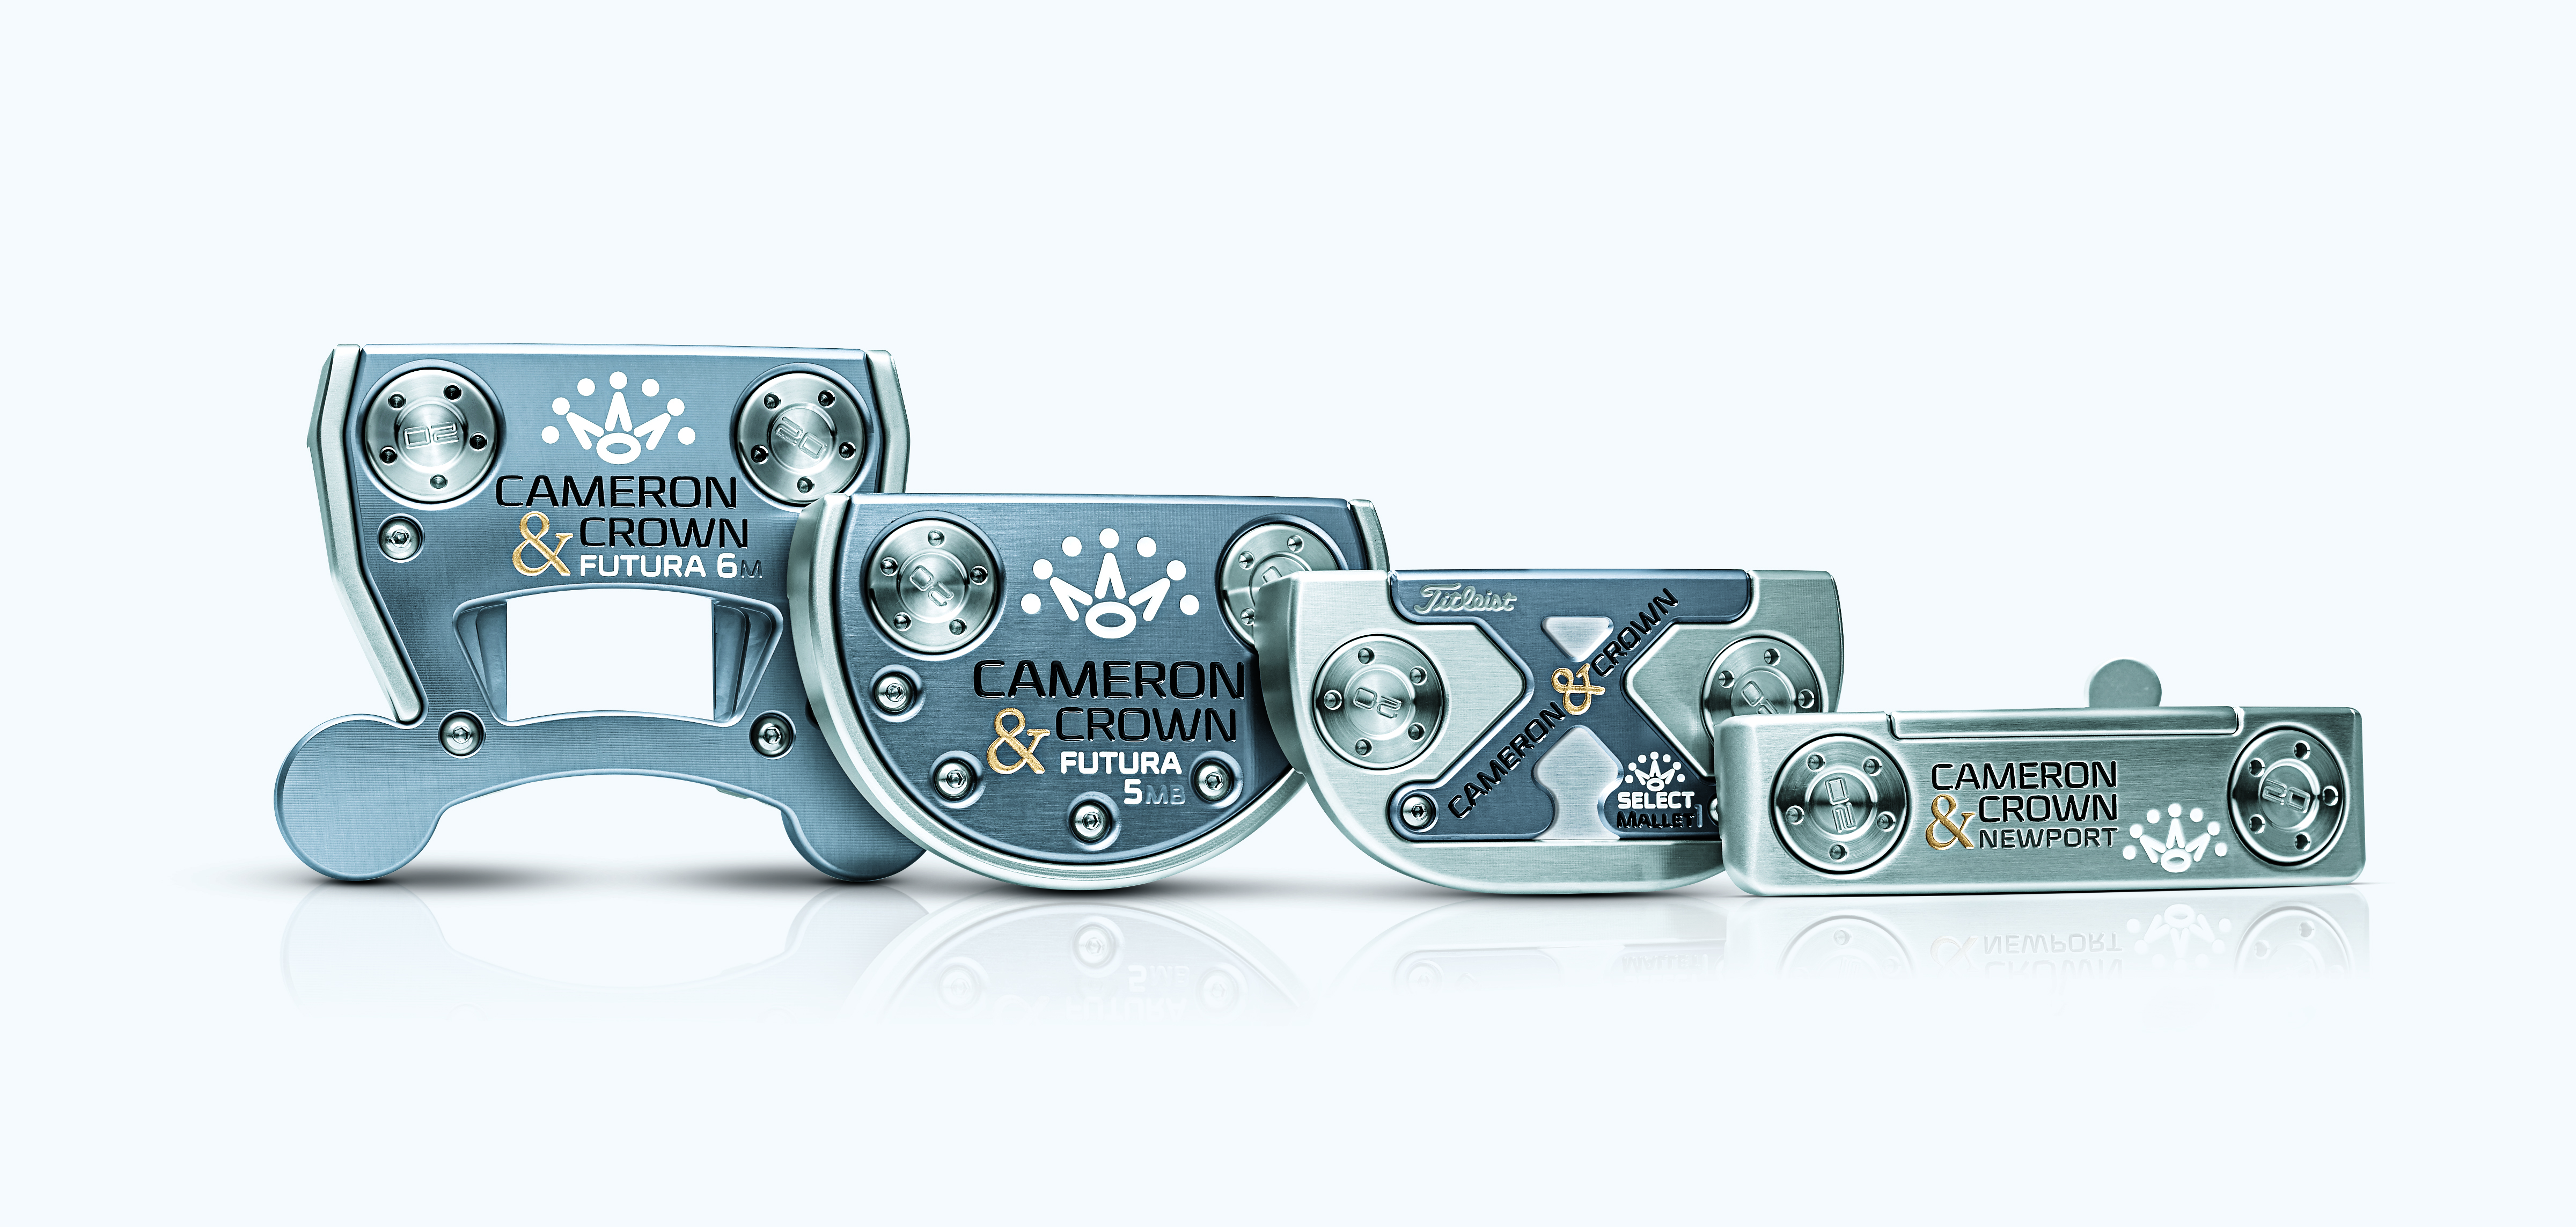 Titleist's Cameron & Crown line of smaller putters gets bigger